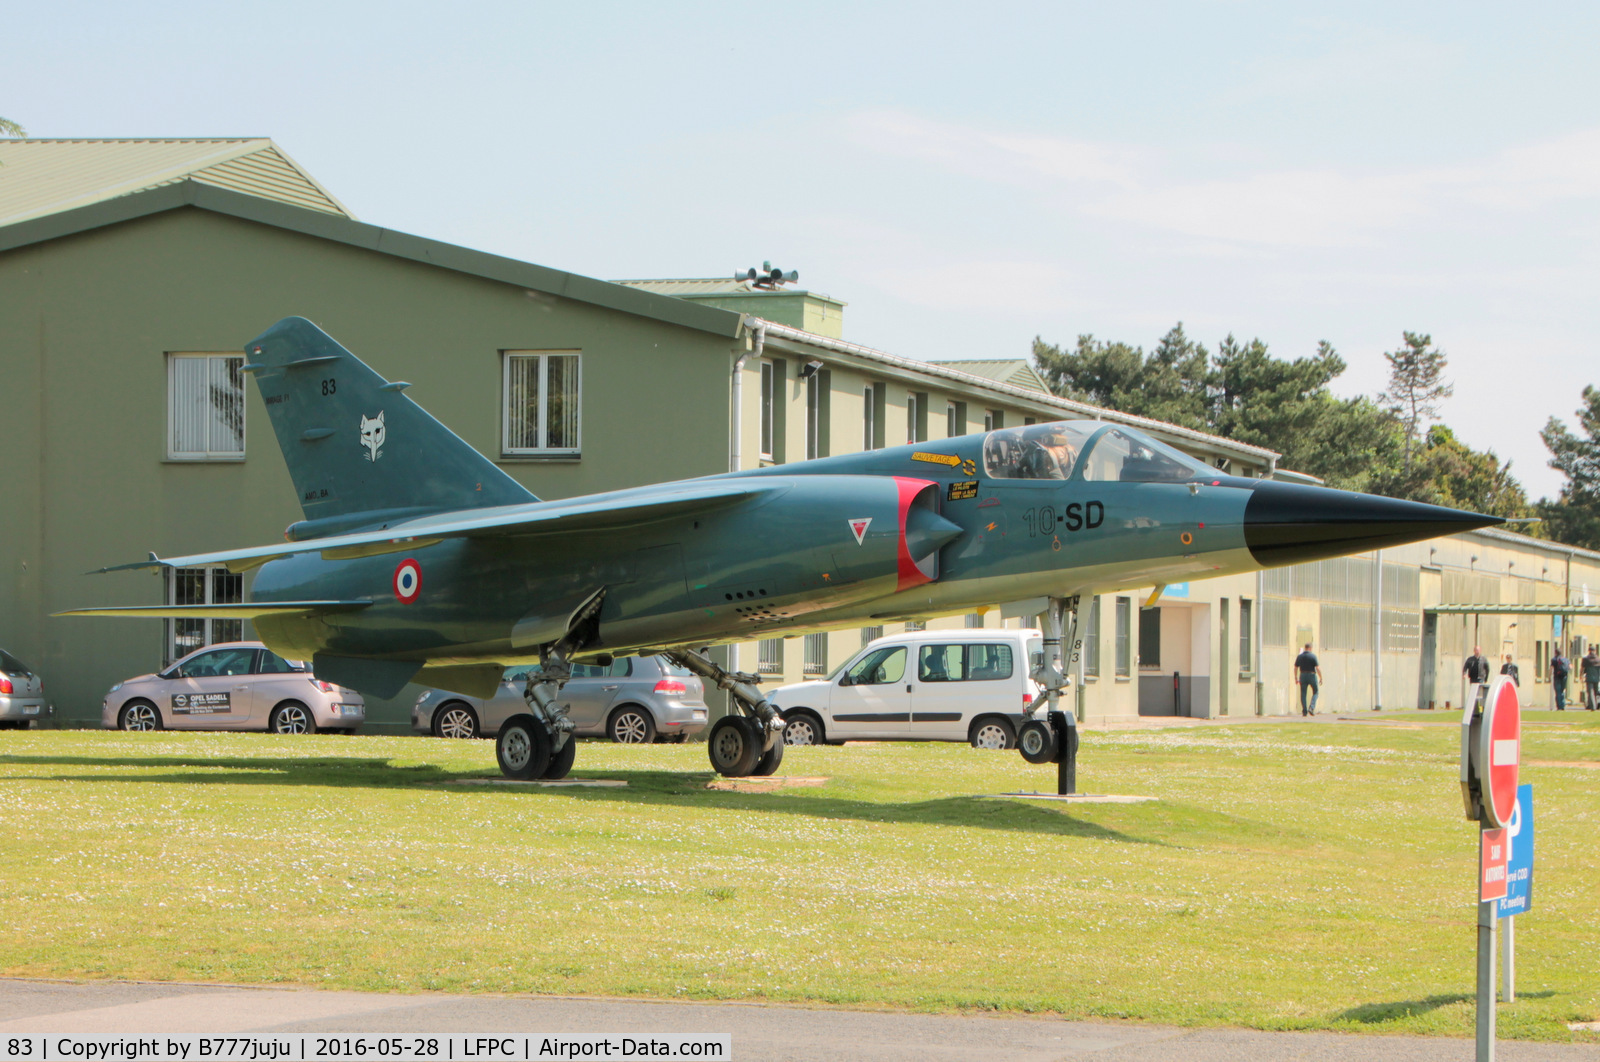 83, Dassault Mirage F.1C C/N 83, Preserved at Creil, new code 30-SJ left side and 10-SD right side